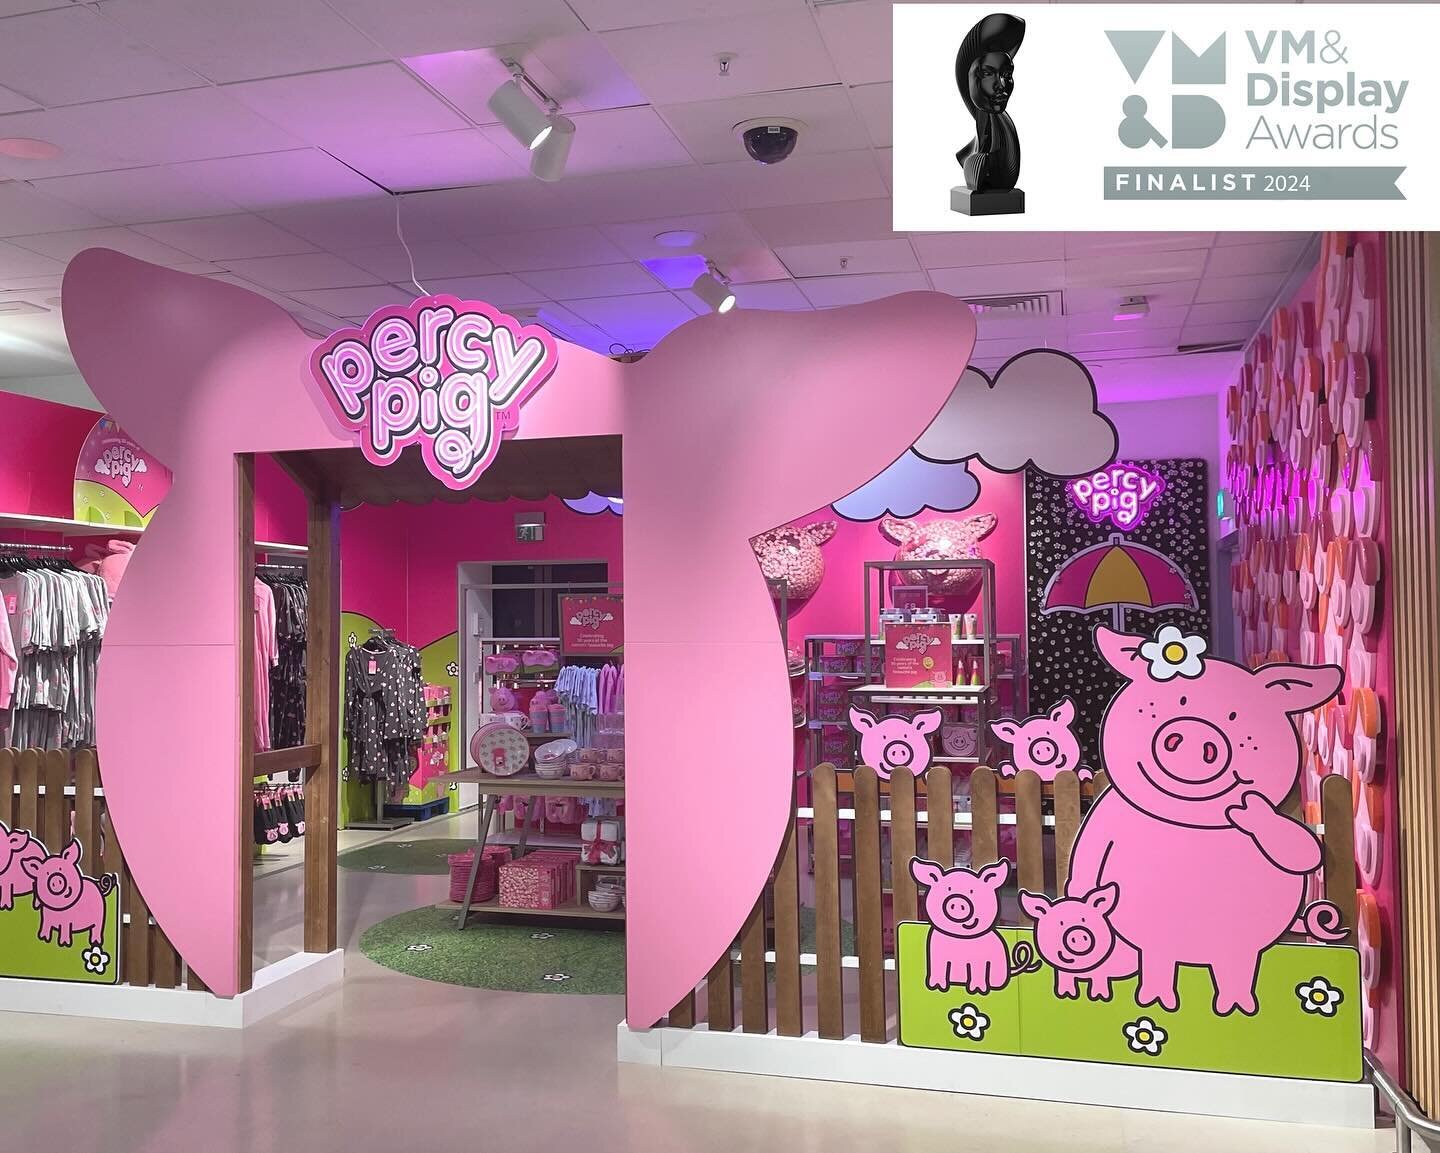 We are thrilled to be a VM &amp; Display finalist for our collaboration with @marksandspencer to bring Percy Pig World to life. It is an honour to be shortlisted in such a strong pool of creatives within the Best Pop Up Store category. 

Many congrat